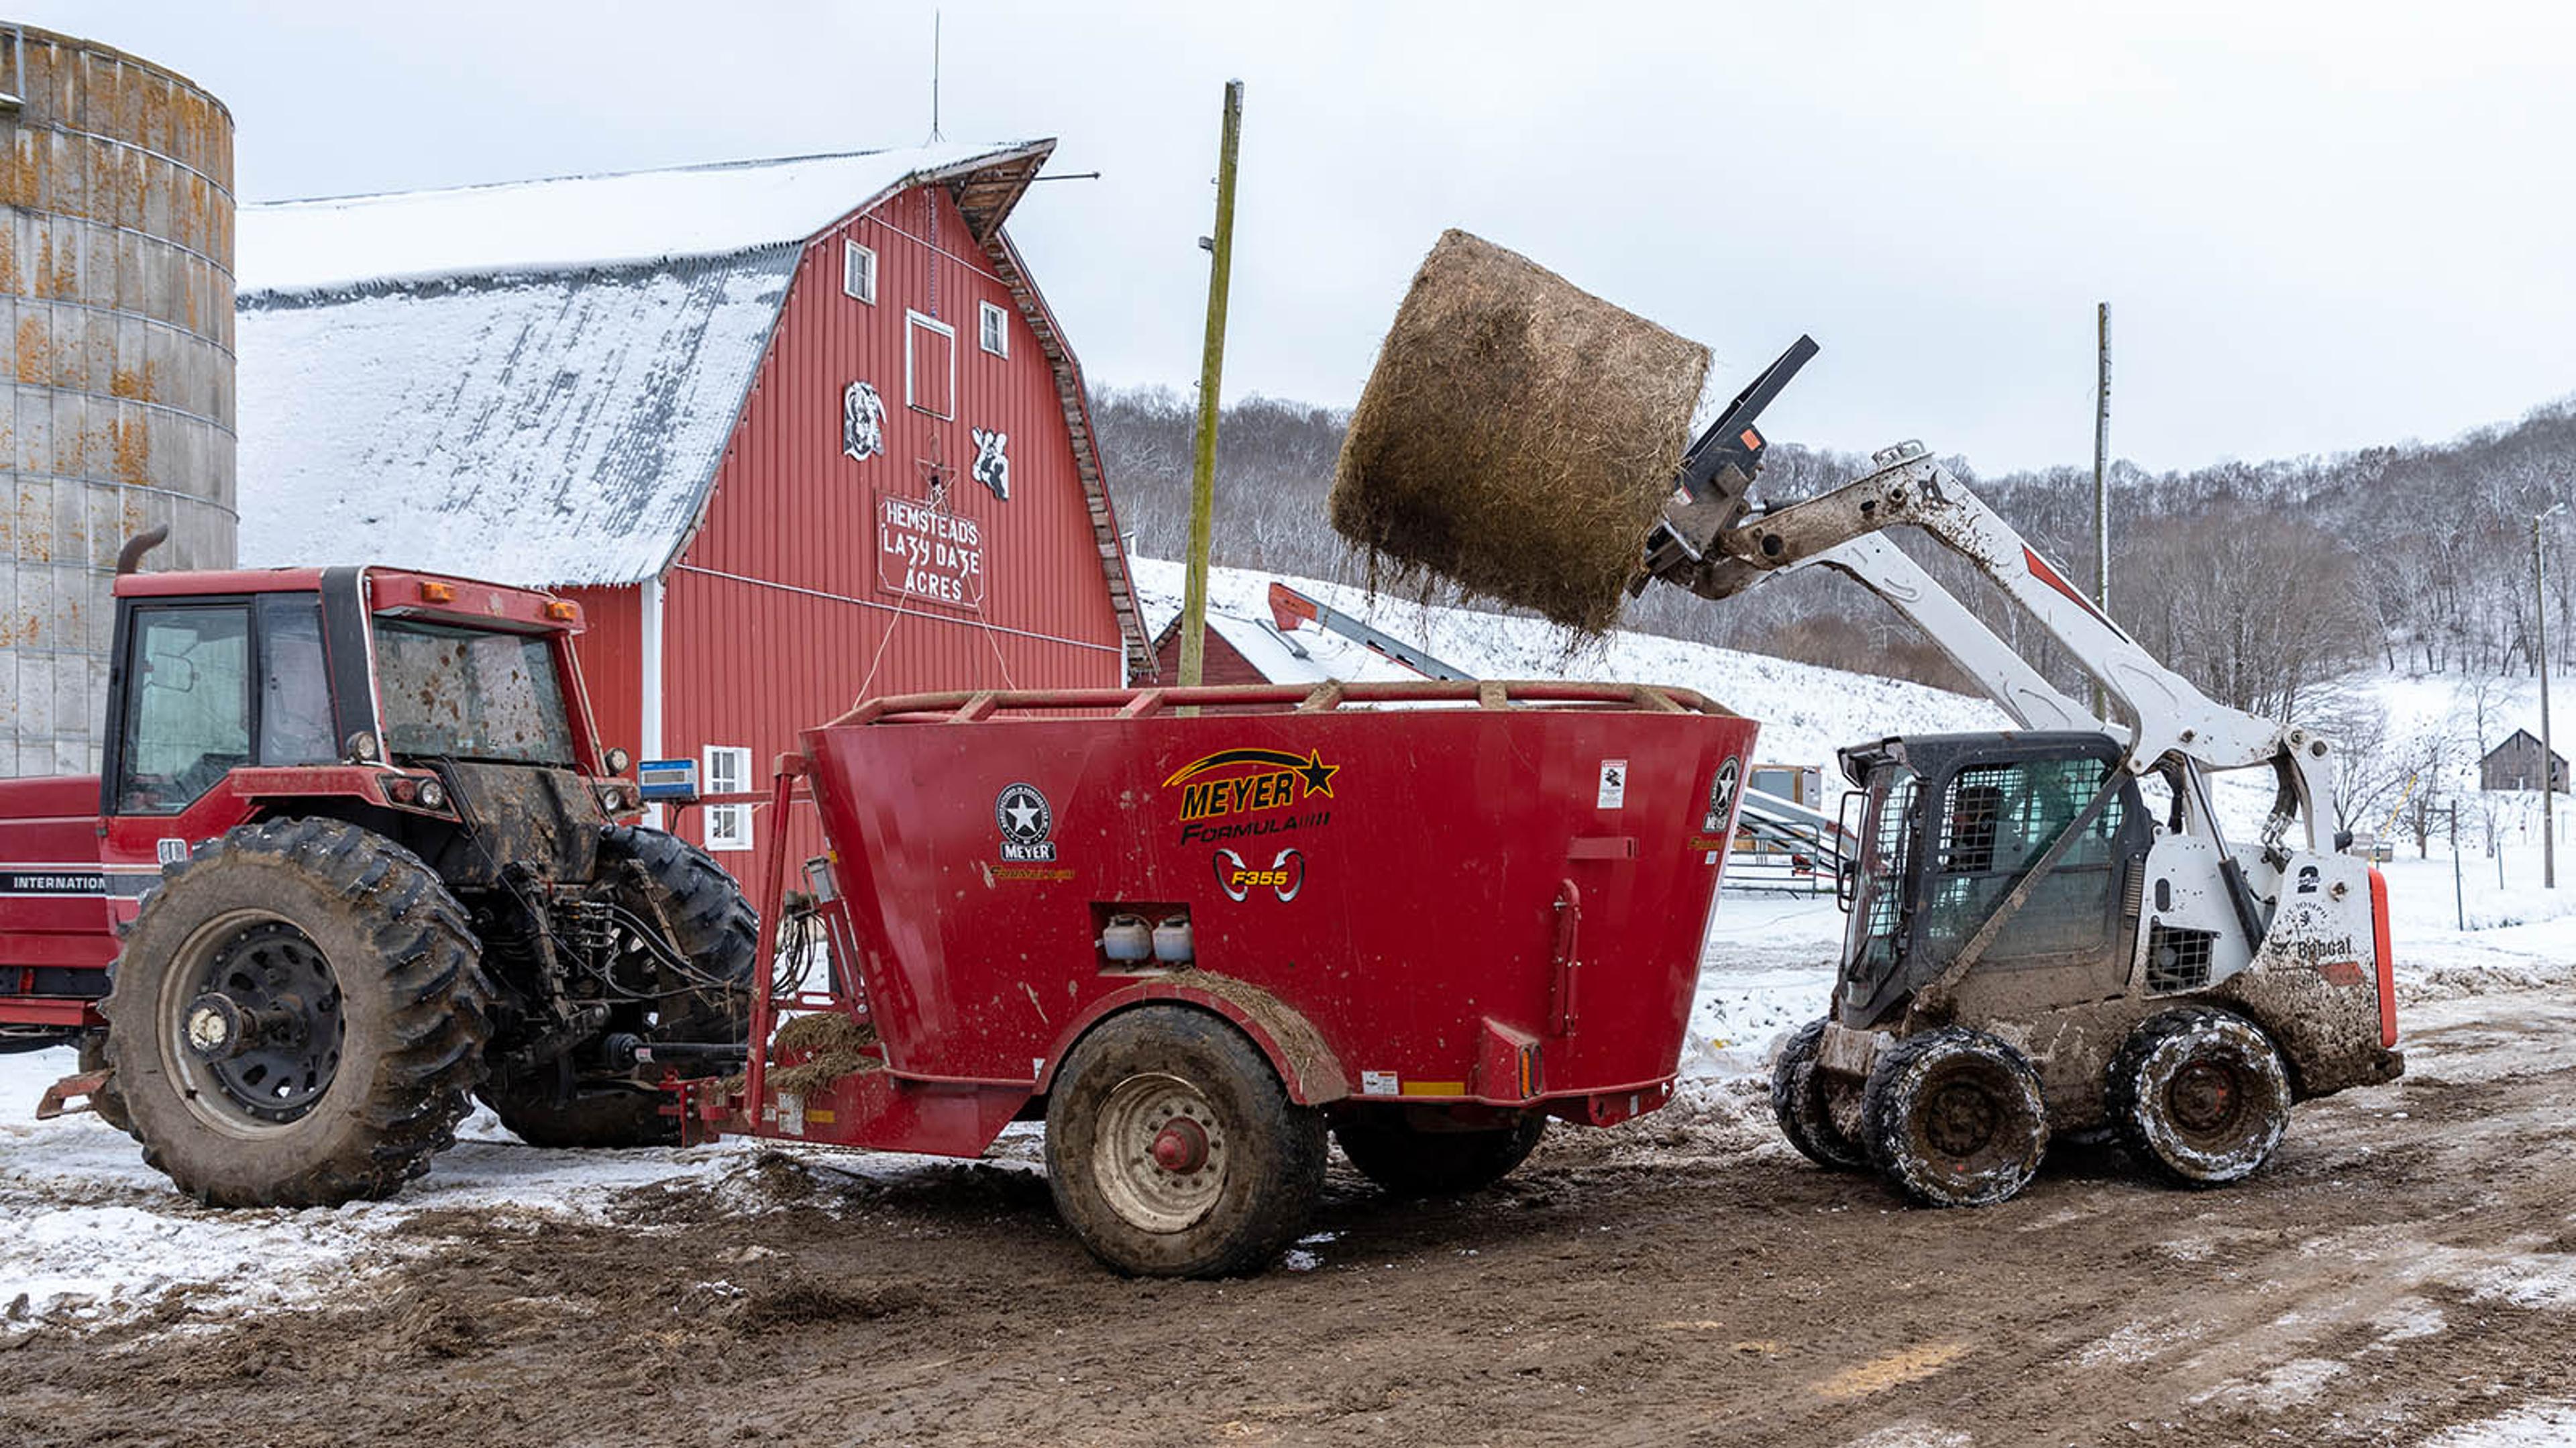 Using the end-loader to lift a round hay bale into a trailer pulled by a tractor.